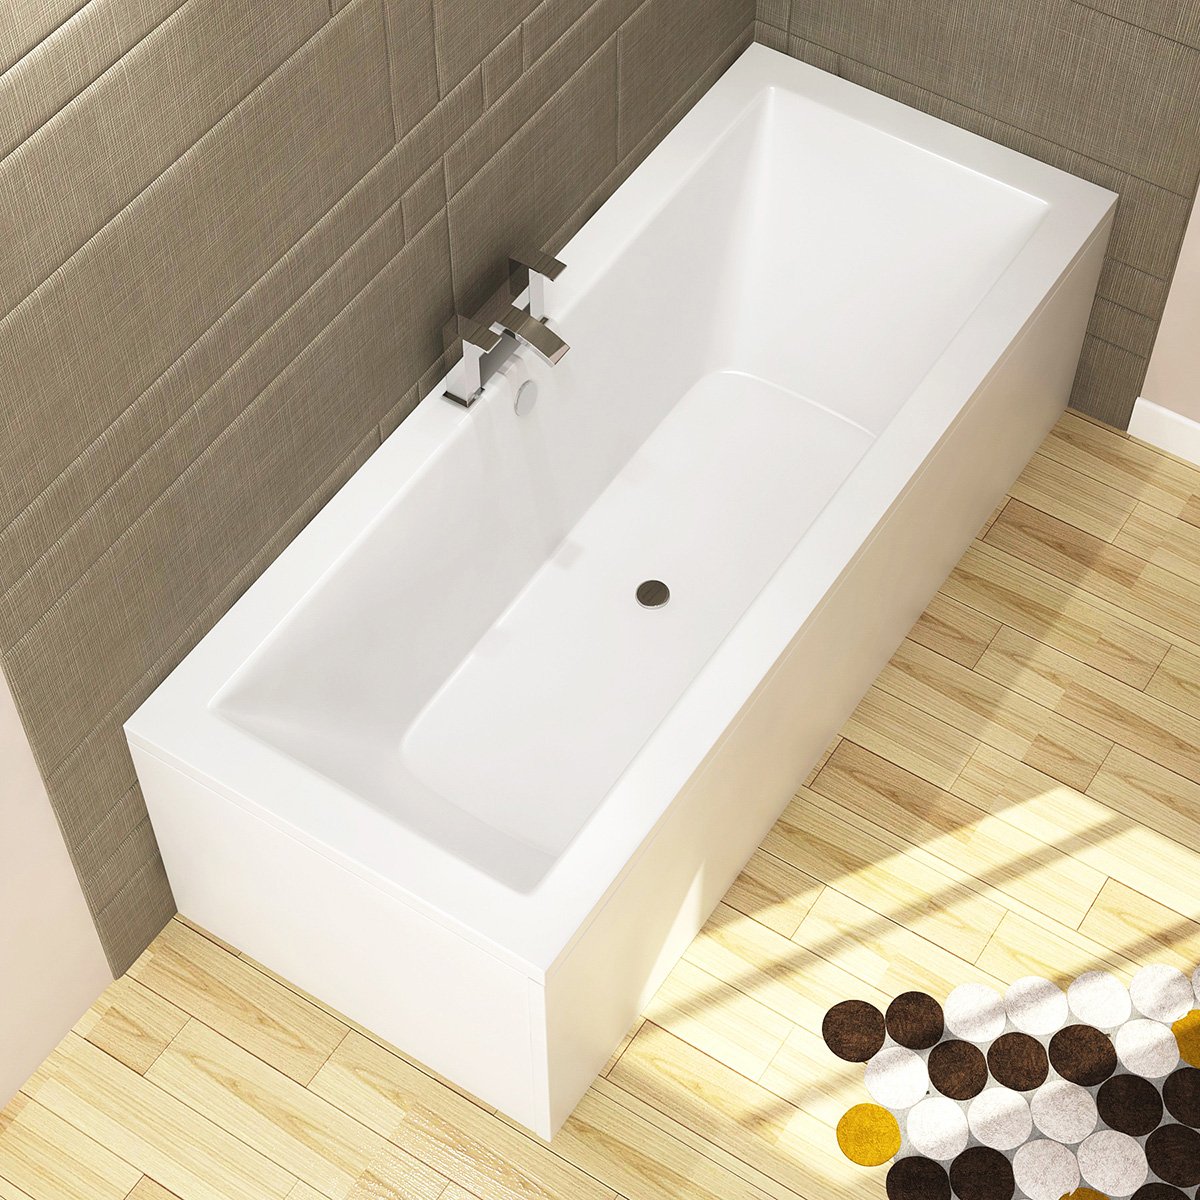 What Is A Standard Bath Size?